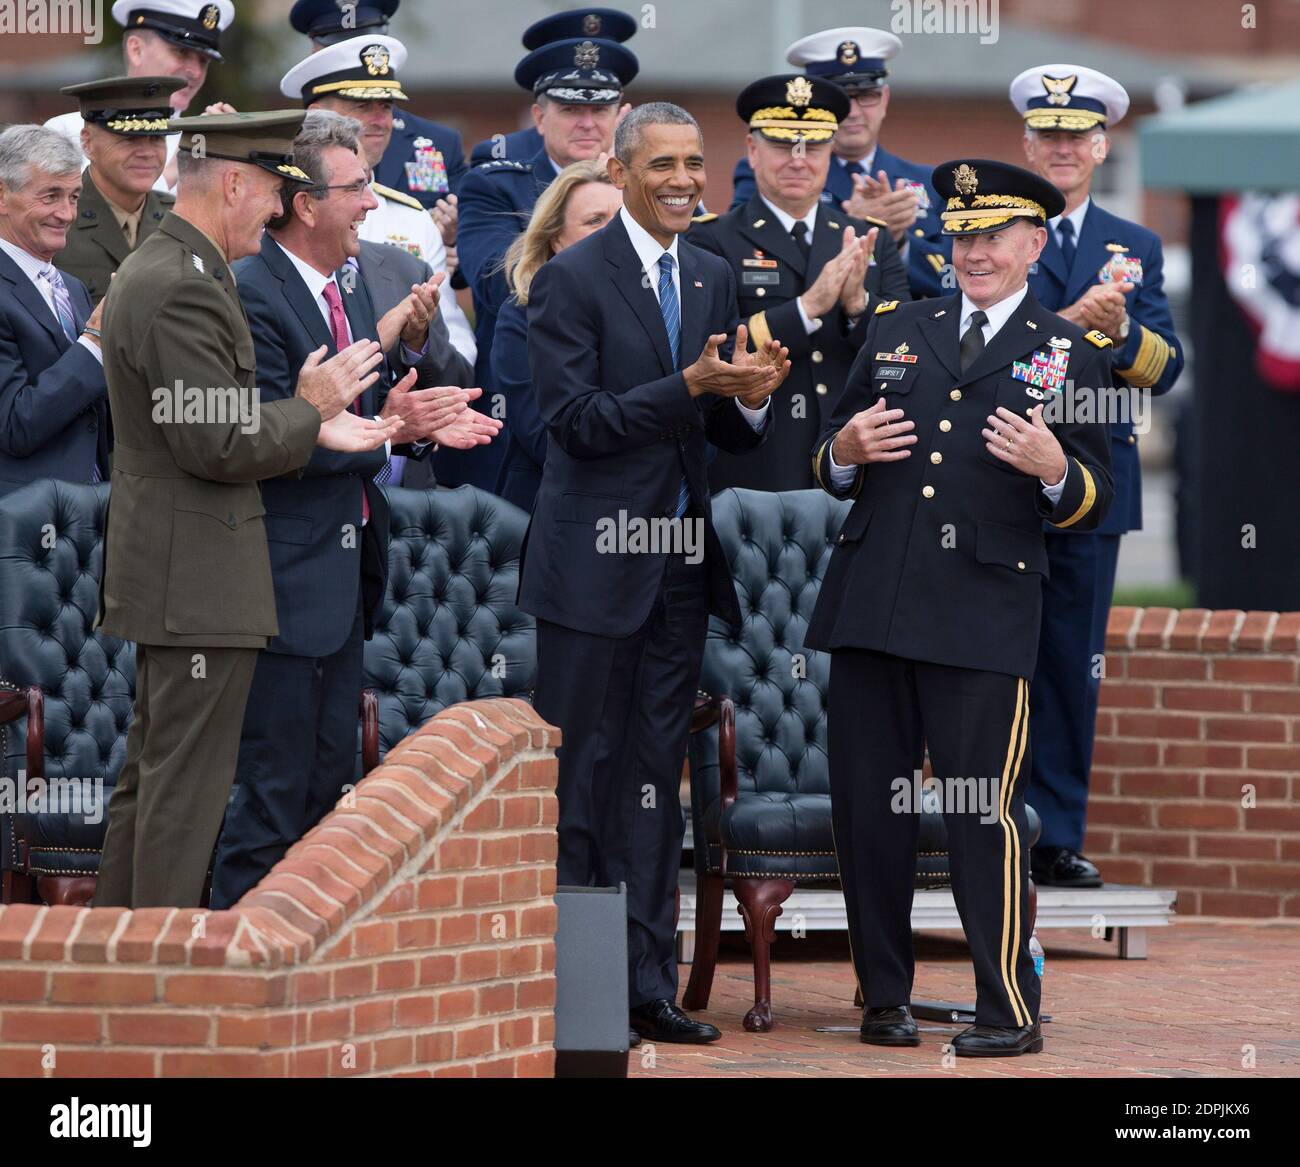 General Joseph Dunford, Defense Secretary Ashton Carter, and US President Barack Obama applaud General Martin Dempsey(right) at his retirement party at Fort Myer, Virginia, September 25, 2015. Photo by Chris Kleponis /Pool/ABACAPRESS.COM Stock Photo